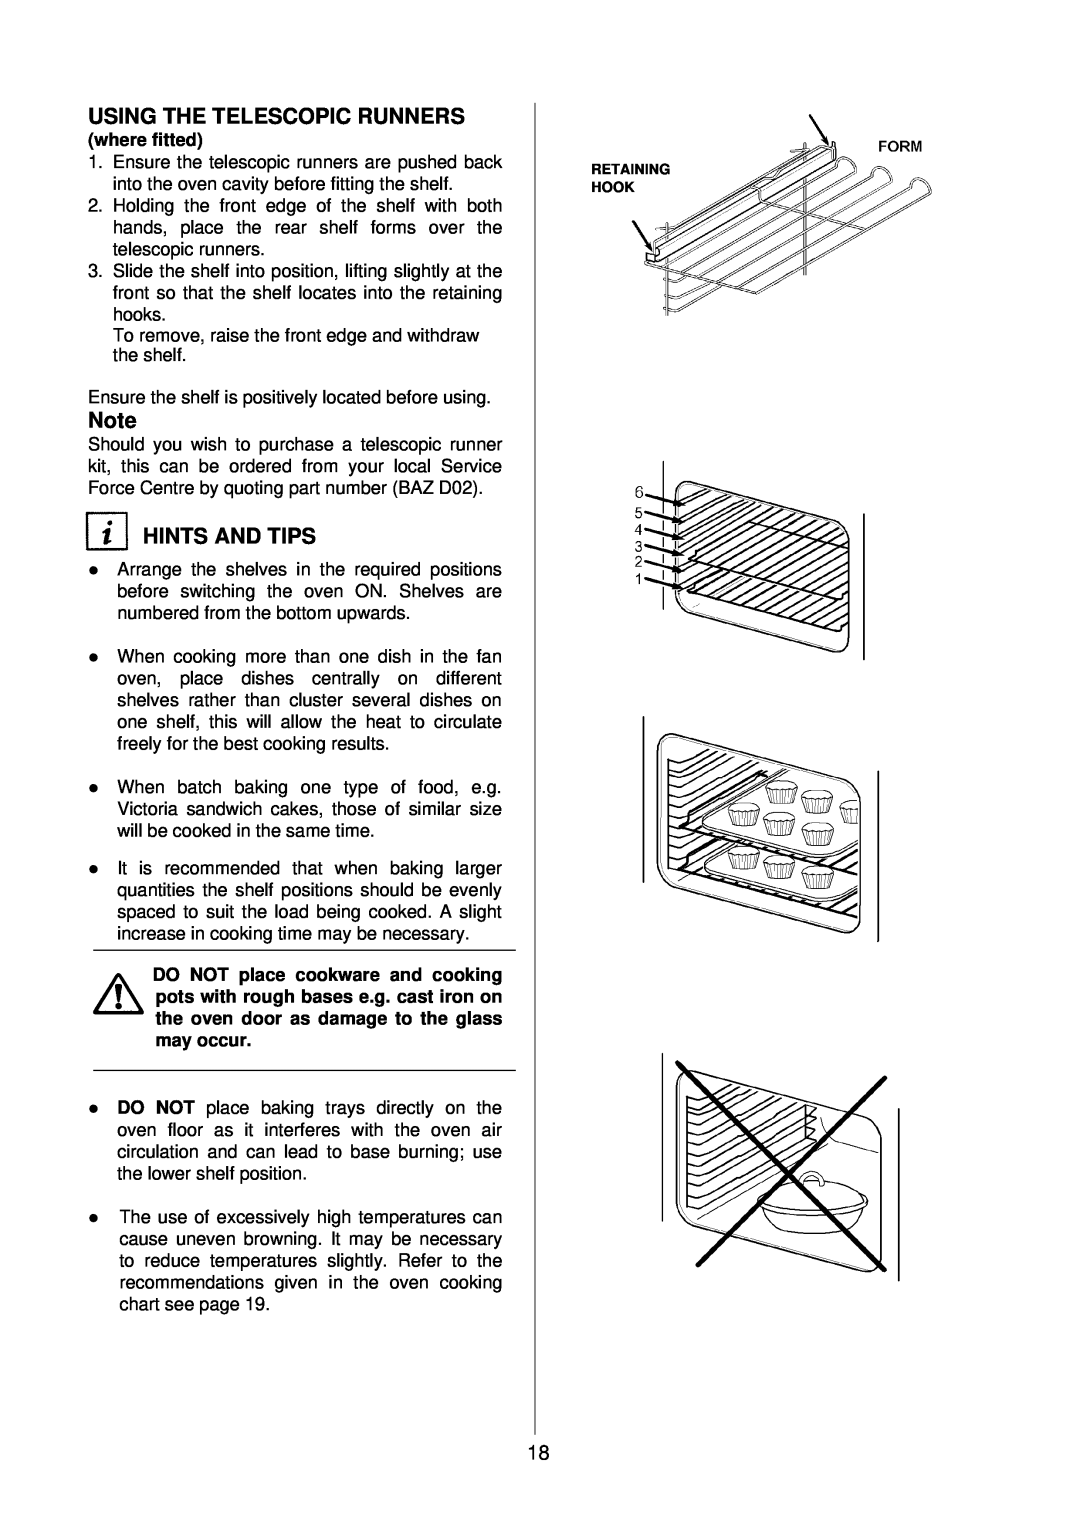 Electrolux D2160-1 operating instructions Using The Telescopic Runners, Hints And Tips, where fitted 